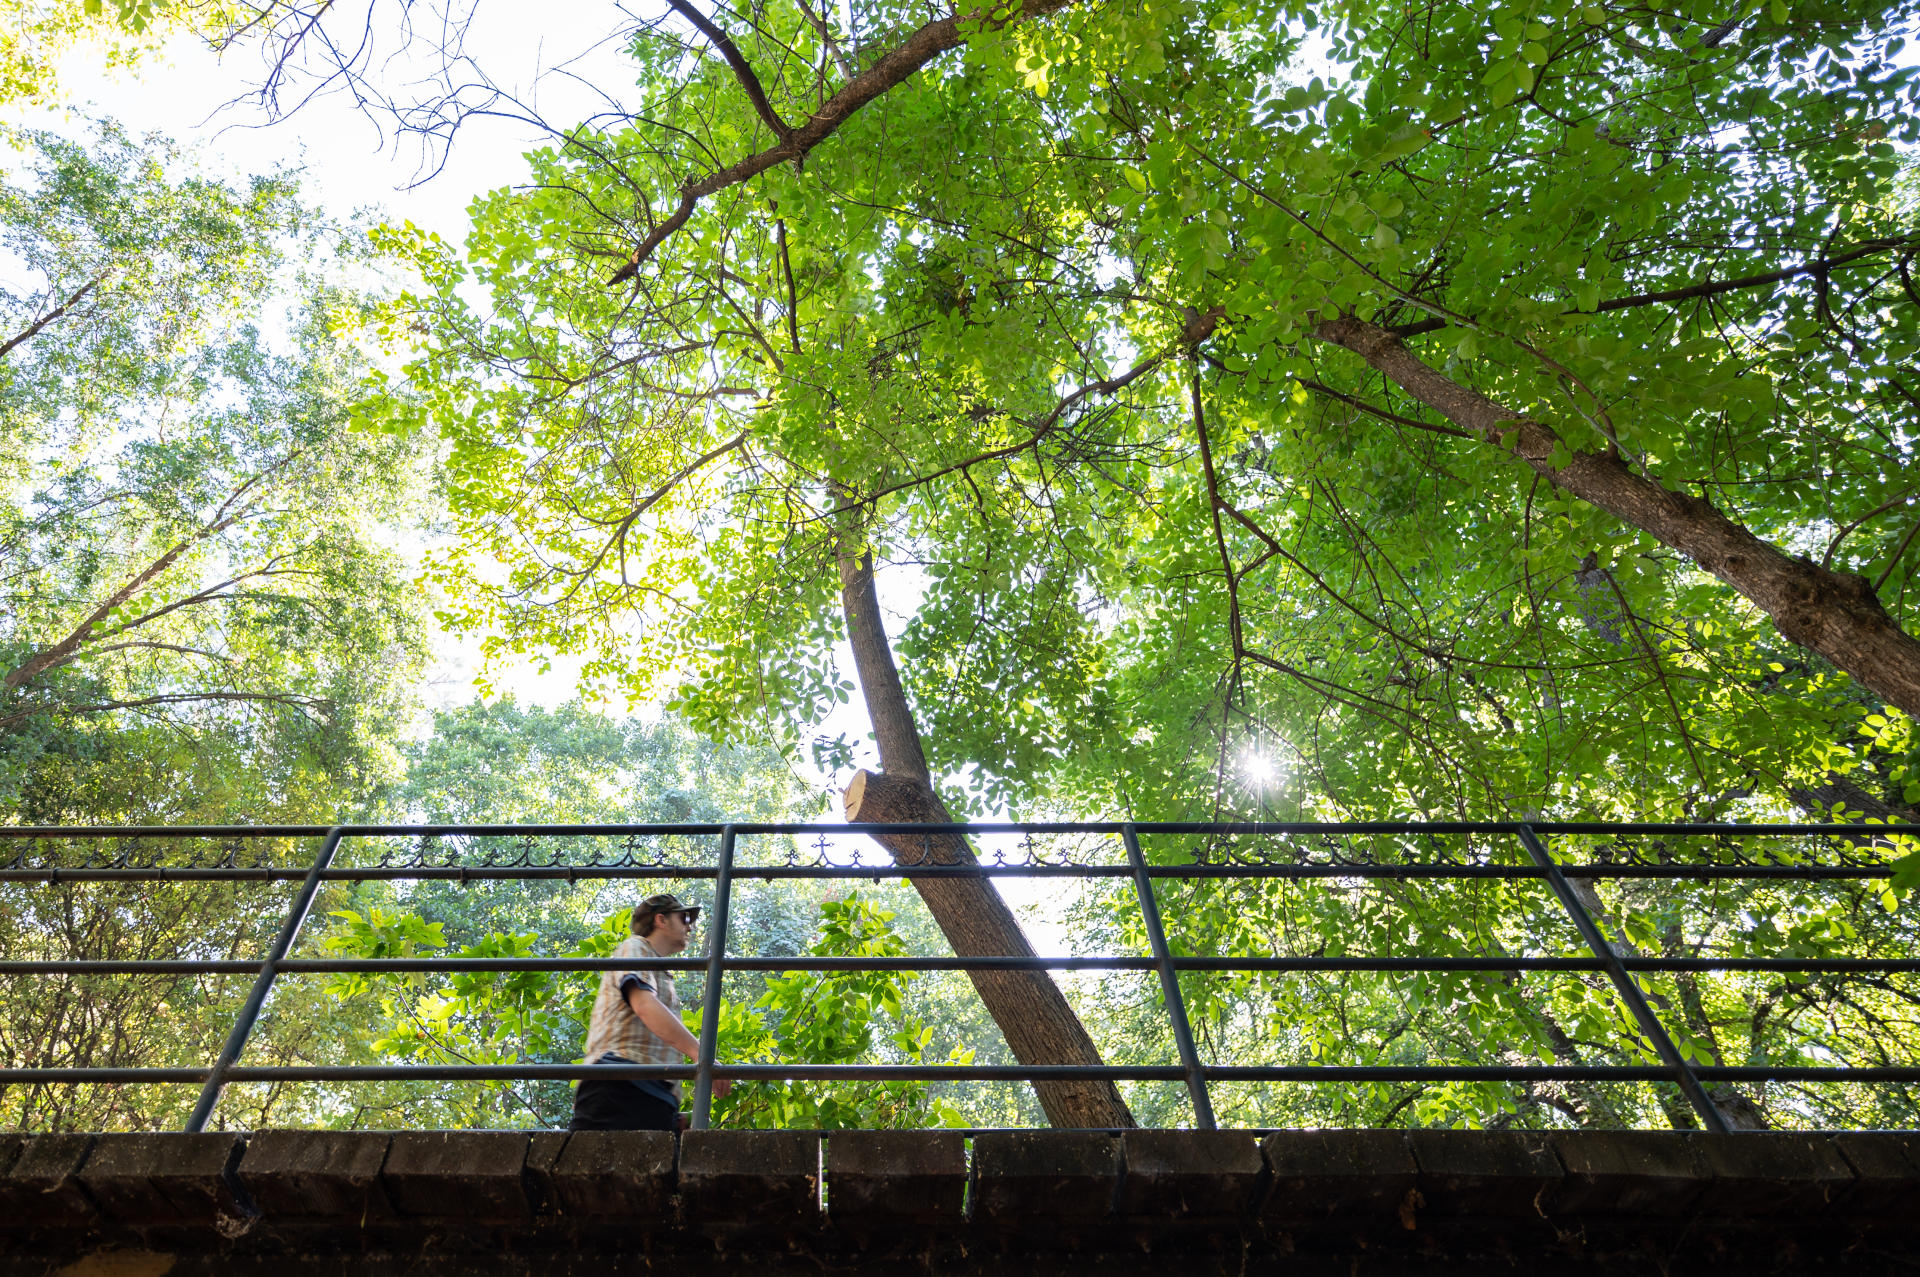 A pedestrian walks across a bridge with the path shrouded in a canopy of trees